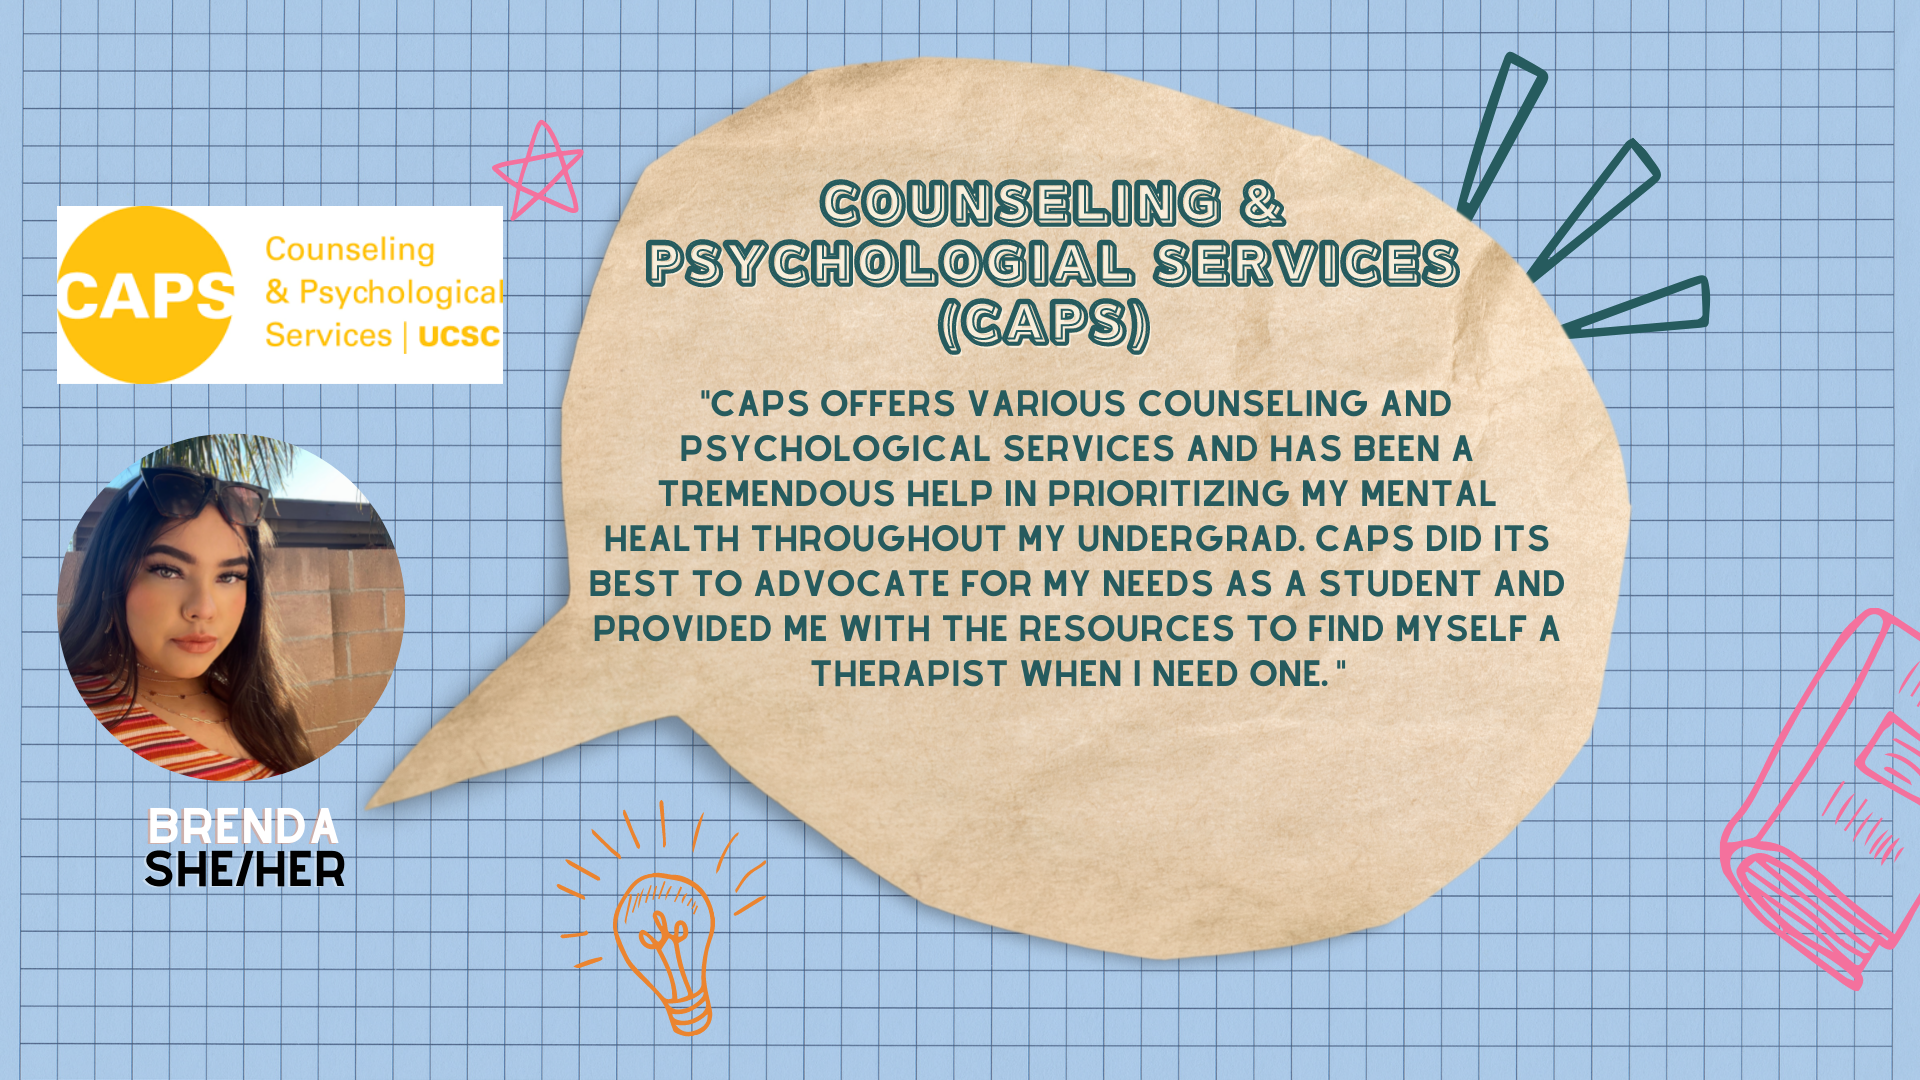 quote: "CAPS offers various counseling and psychological services and has been a tremendous help in prioritizing my mental health throughout my undergrad. CAPS did its best to advocate for my needs as a student and provided me with the resources to find myself a therapist when I need one."